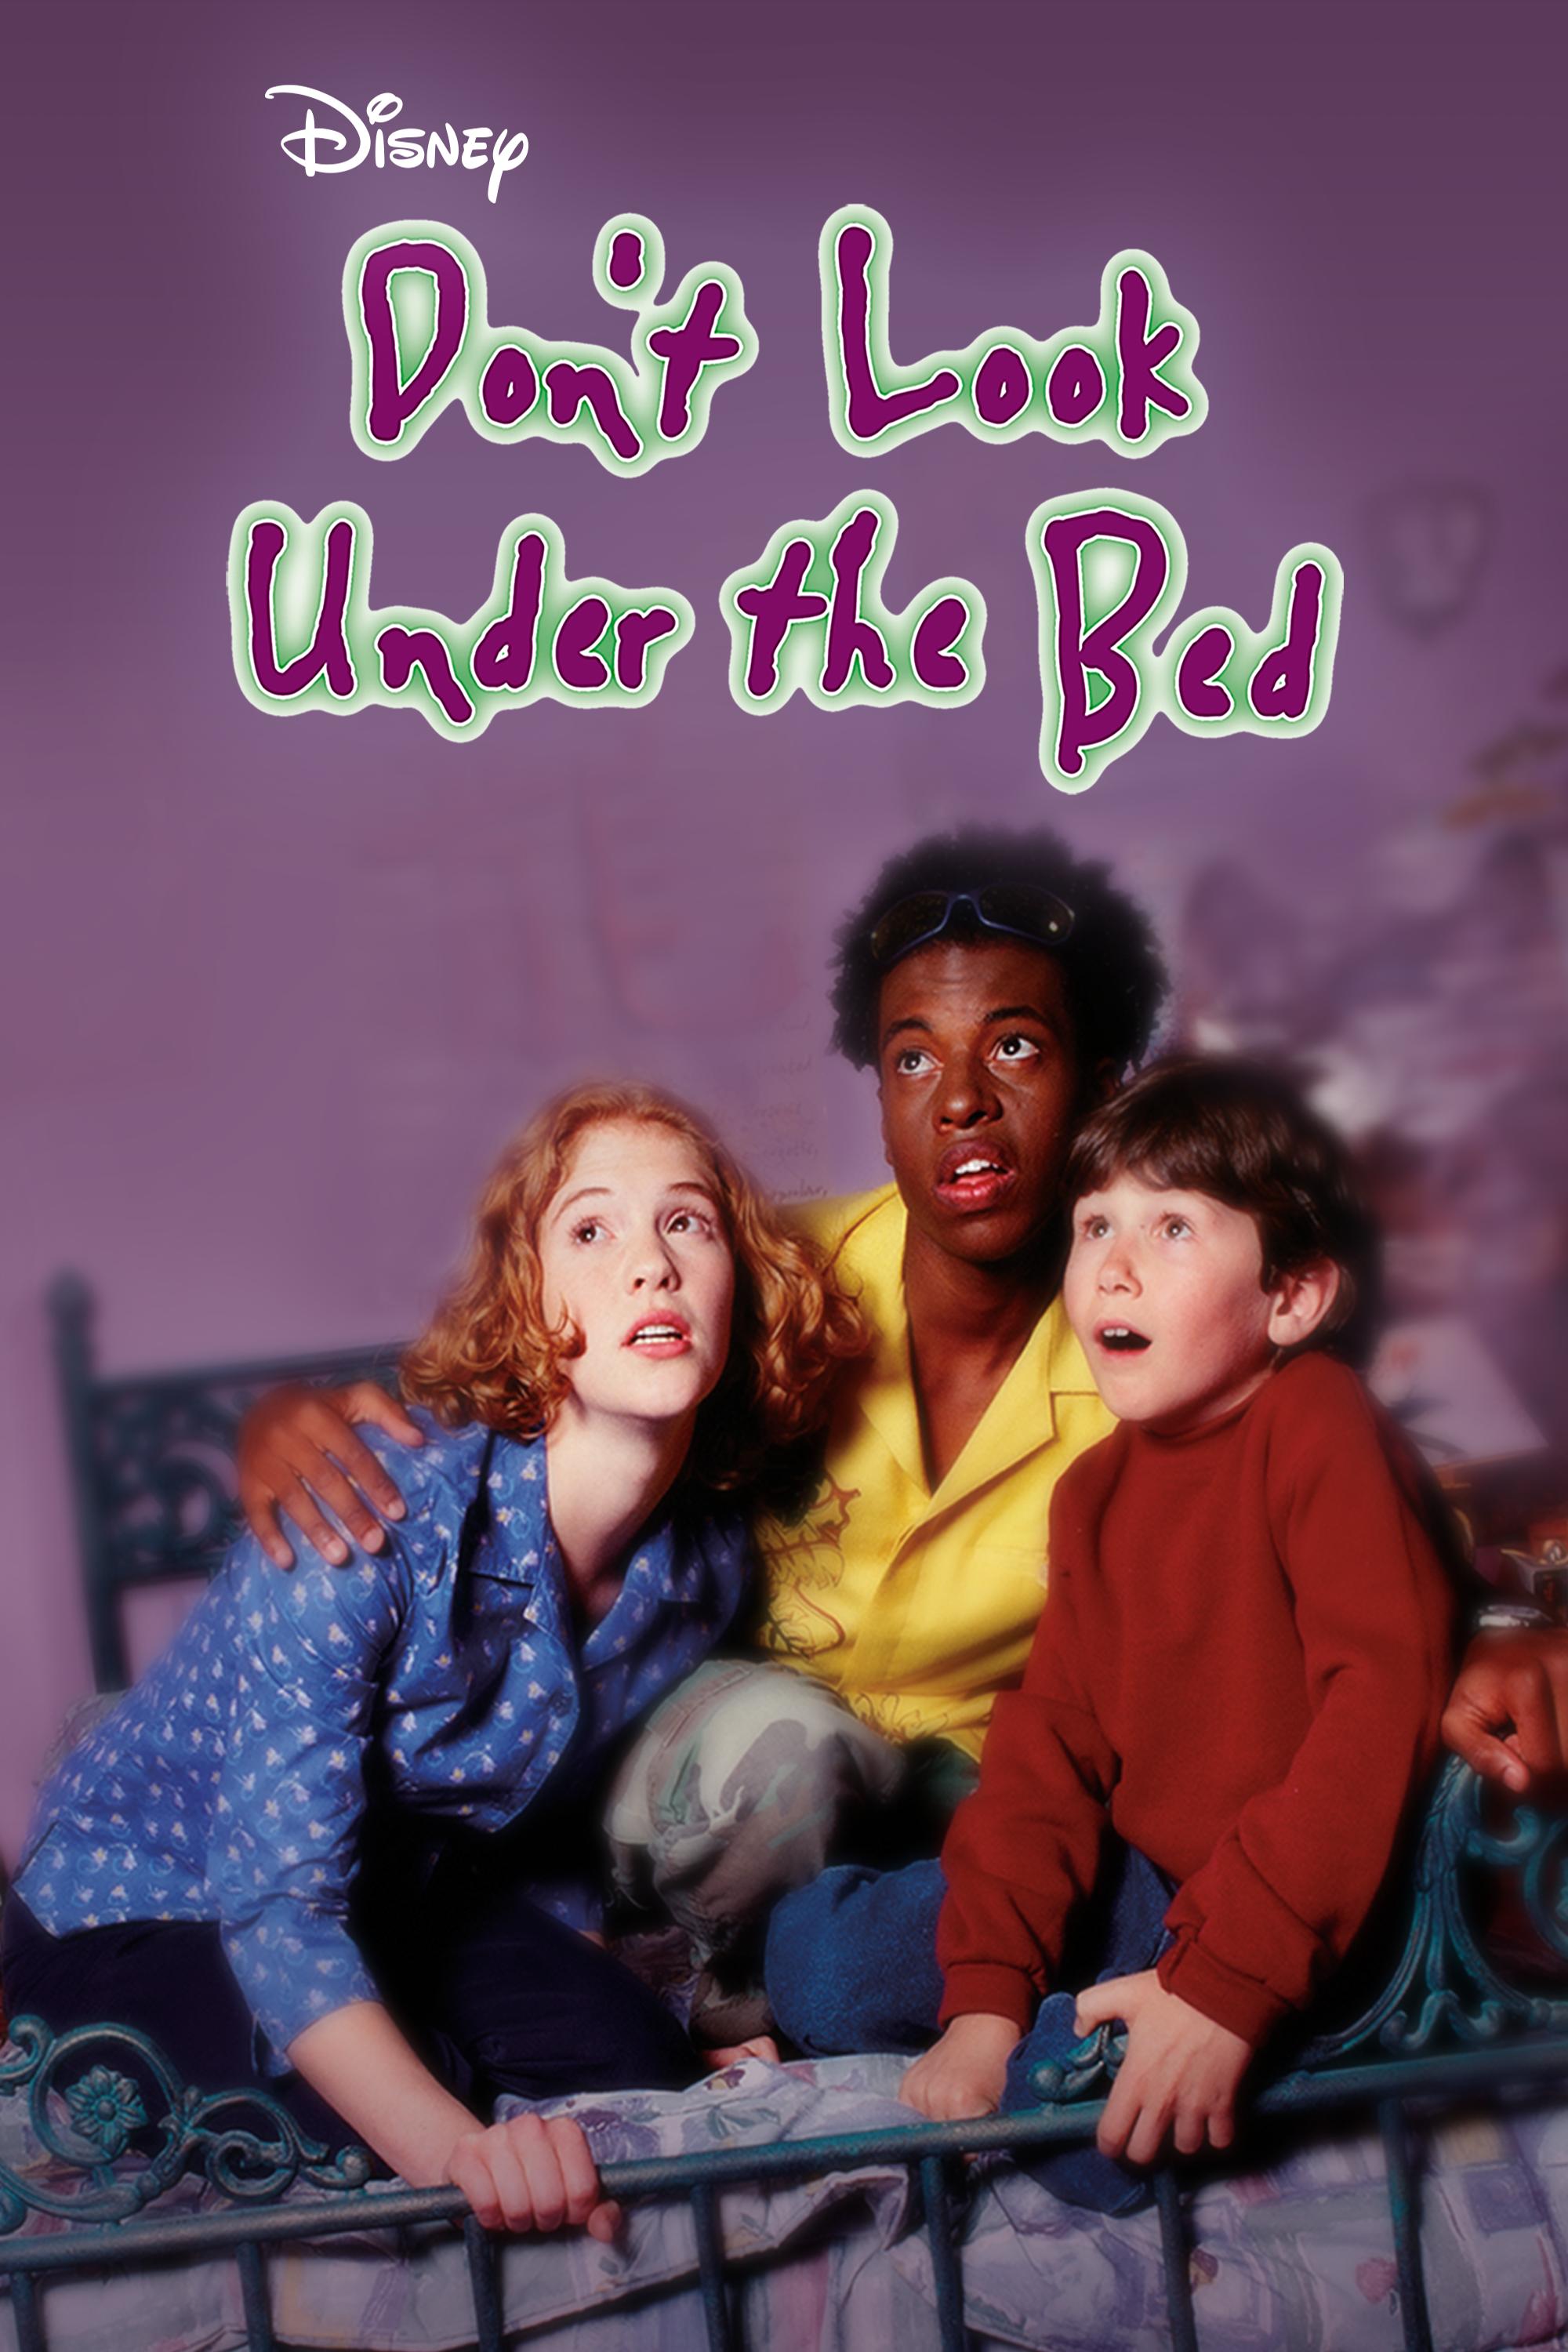 Don't Look Under the Bed (1999) starring Erin Chambers on DVD on DVD